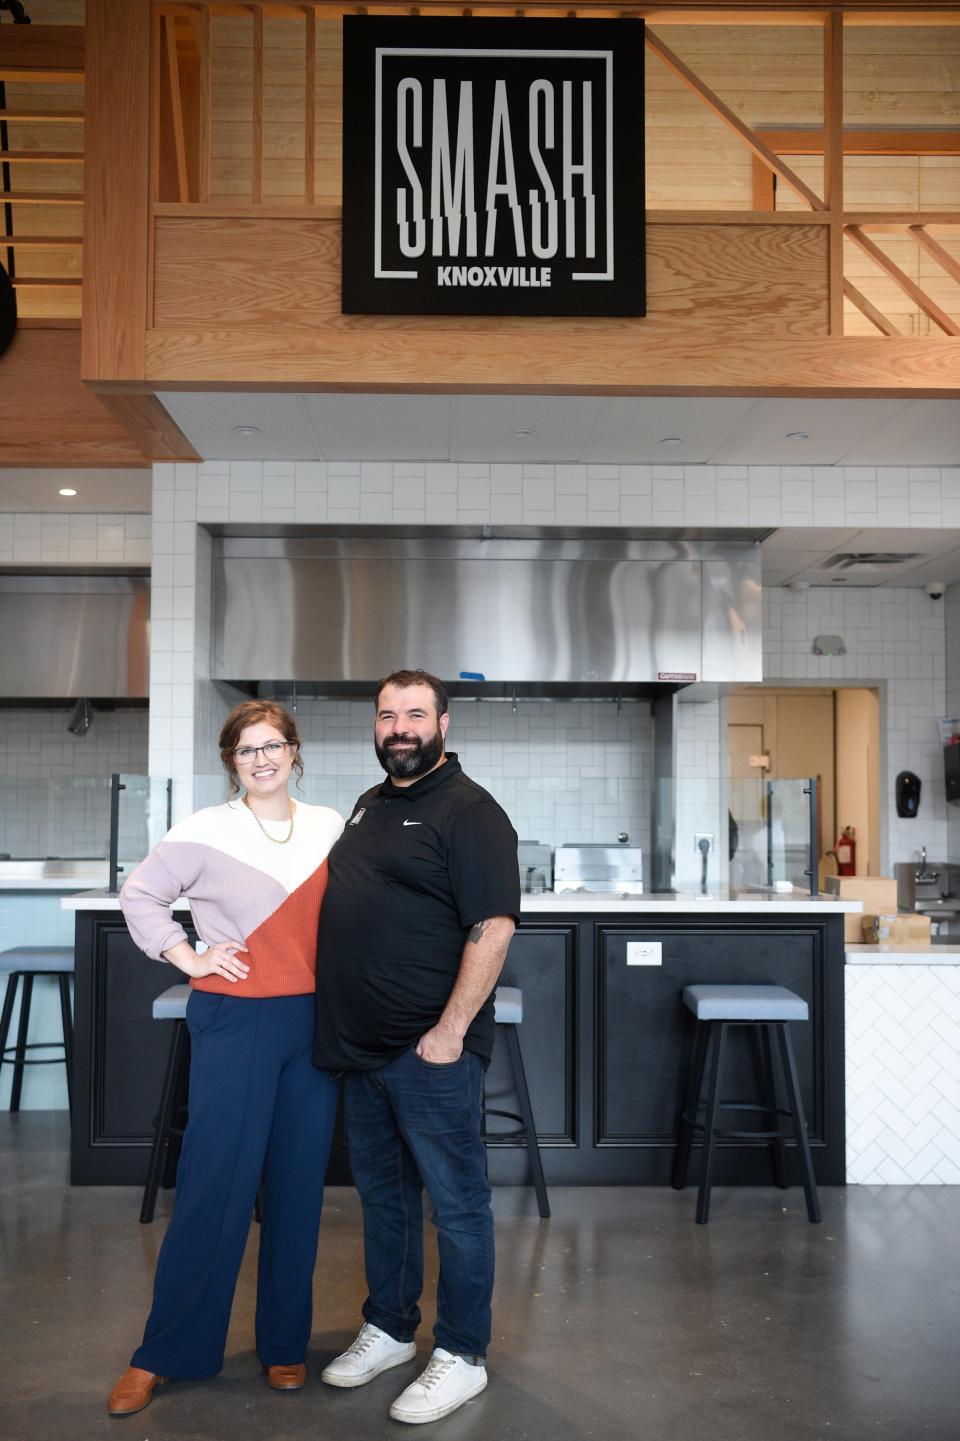 Ashley and Paul Moody, owners of SmashCity Knoxville, will no longer oversee Marble City Market operations after taking over management responsibilities from national food hall curator Hospitality HQ last year. The couple plans to close their food hall stall to open a SmashCity location at the former OliBea at 211 S. Central St.